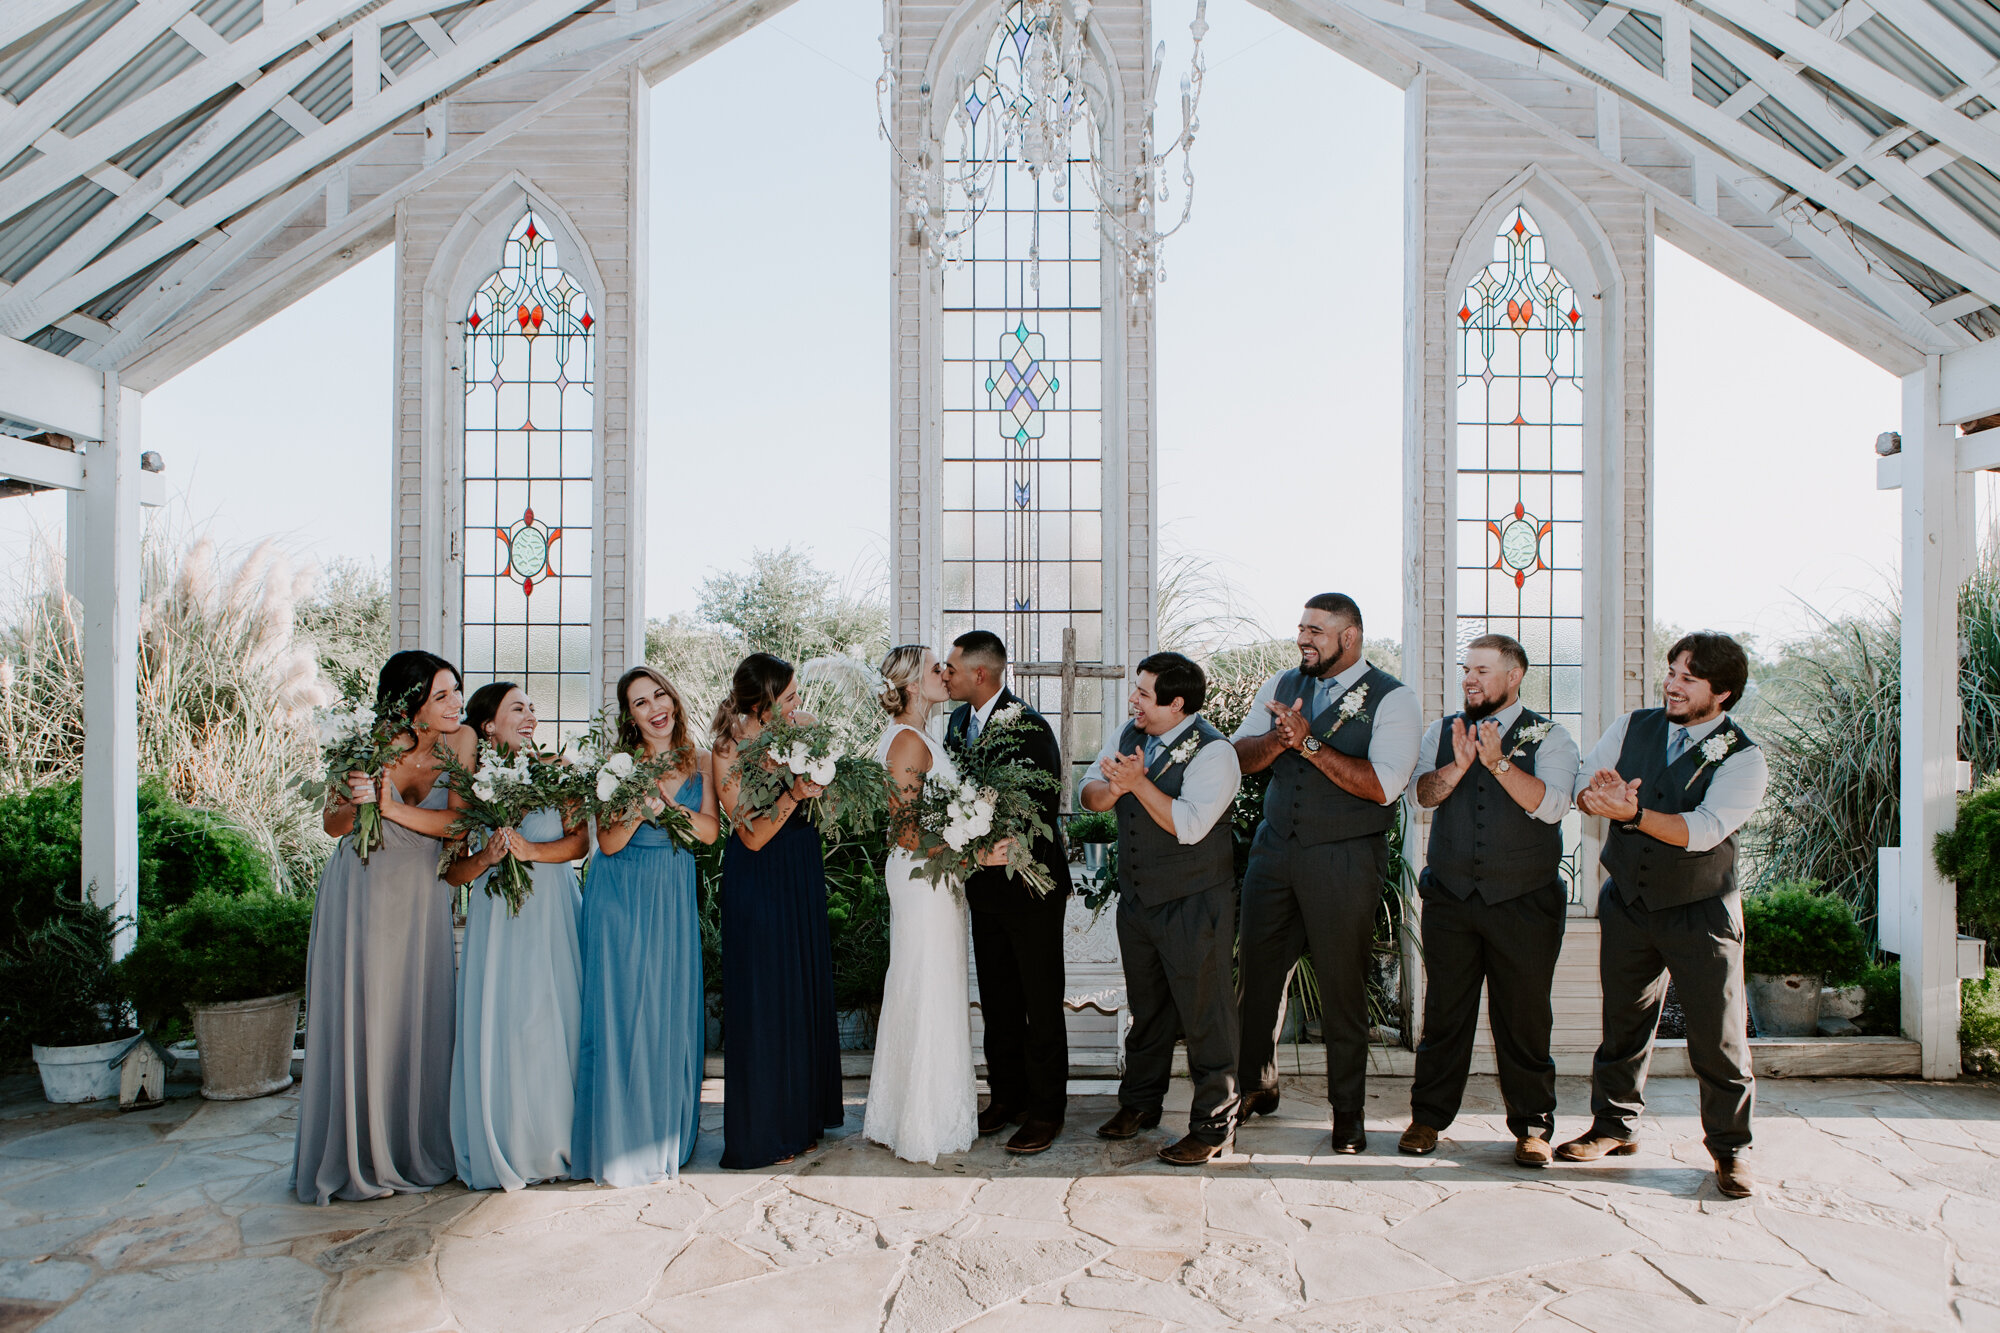 Bride and groom with bridal party inside the chapel. Radiant Bohemian Hill Country Wedding at Gruene Estate in New Braunfels, TX